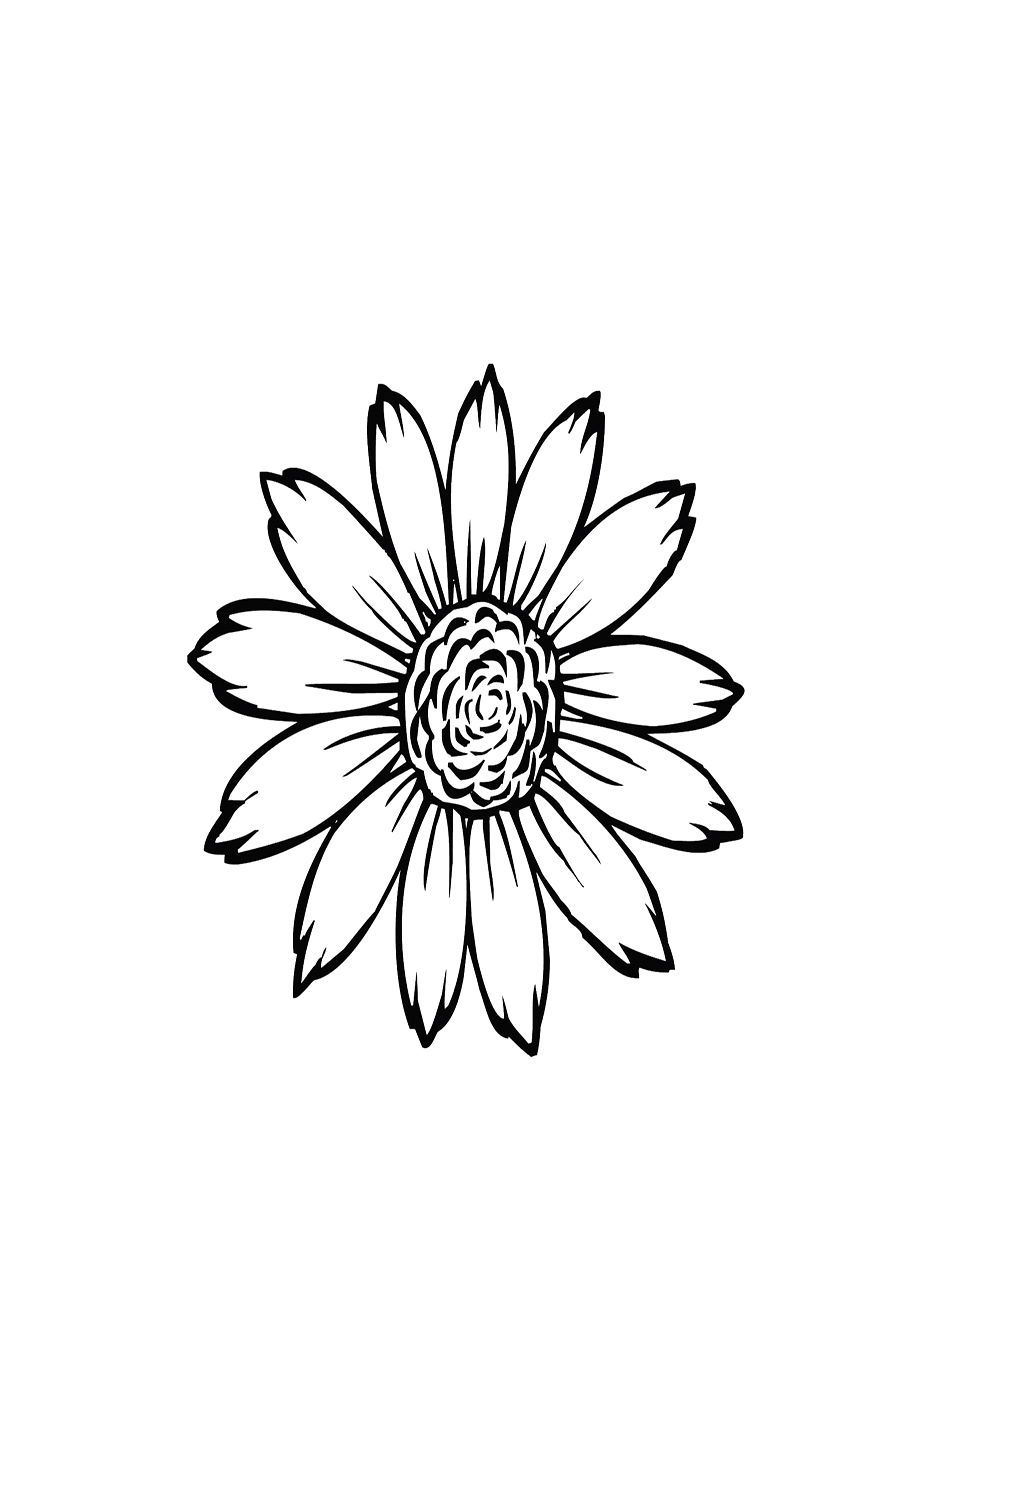 Flowering Head of Sunflower Coloring Page